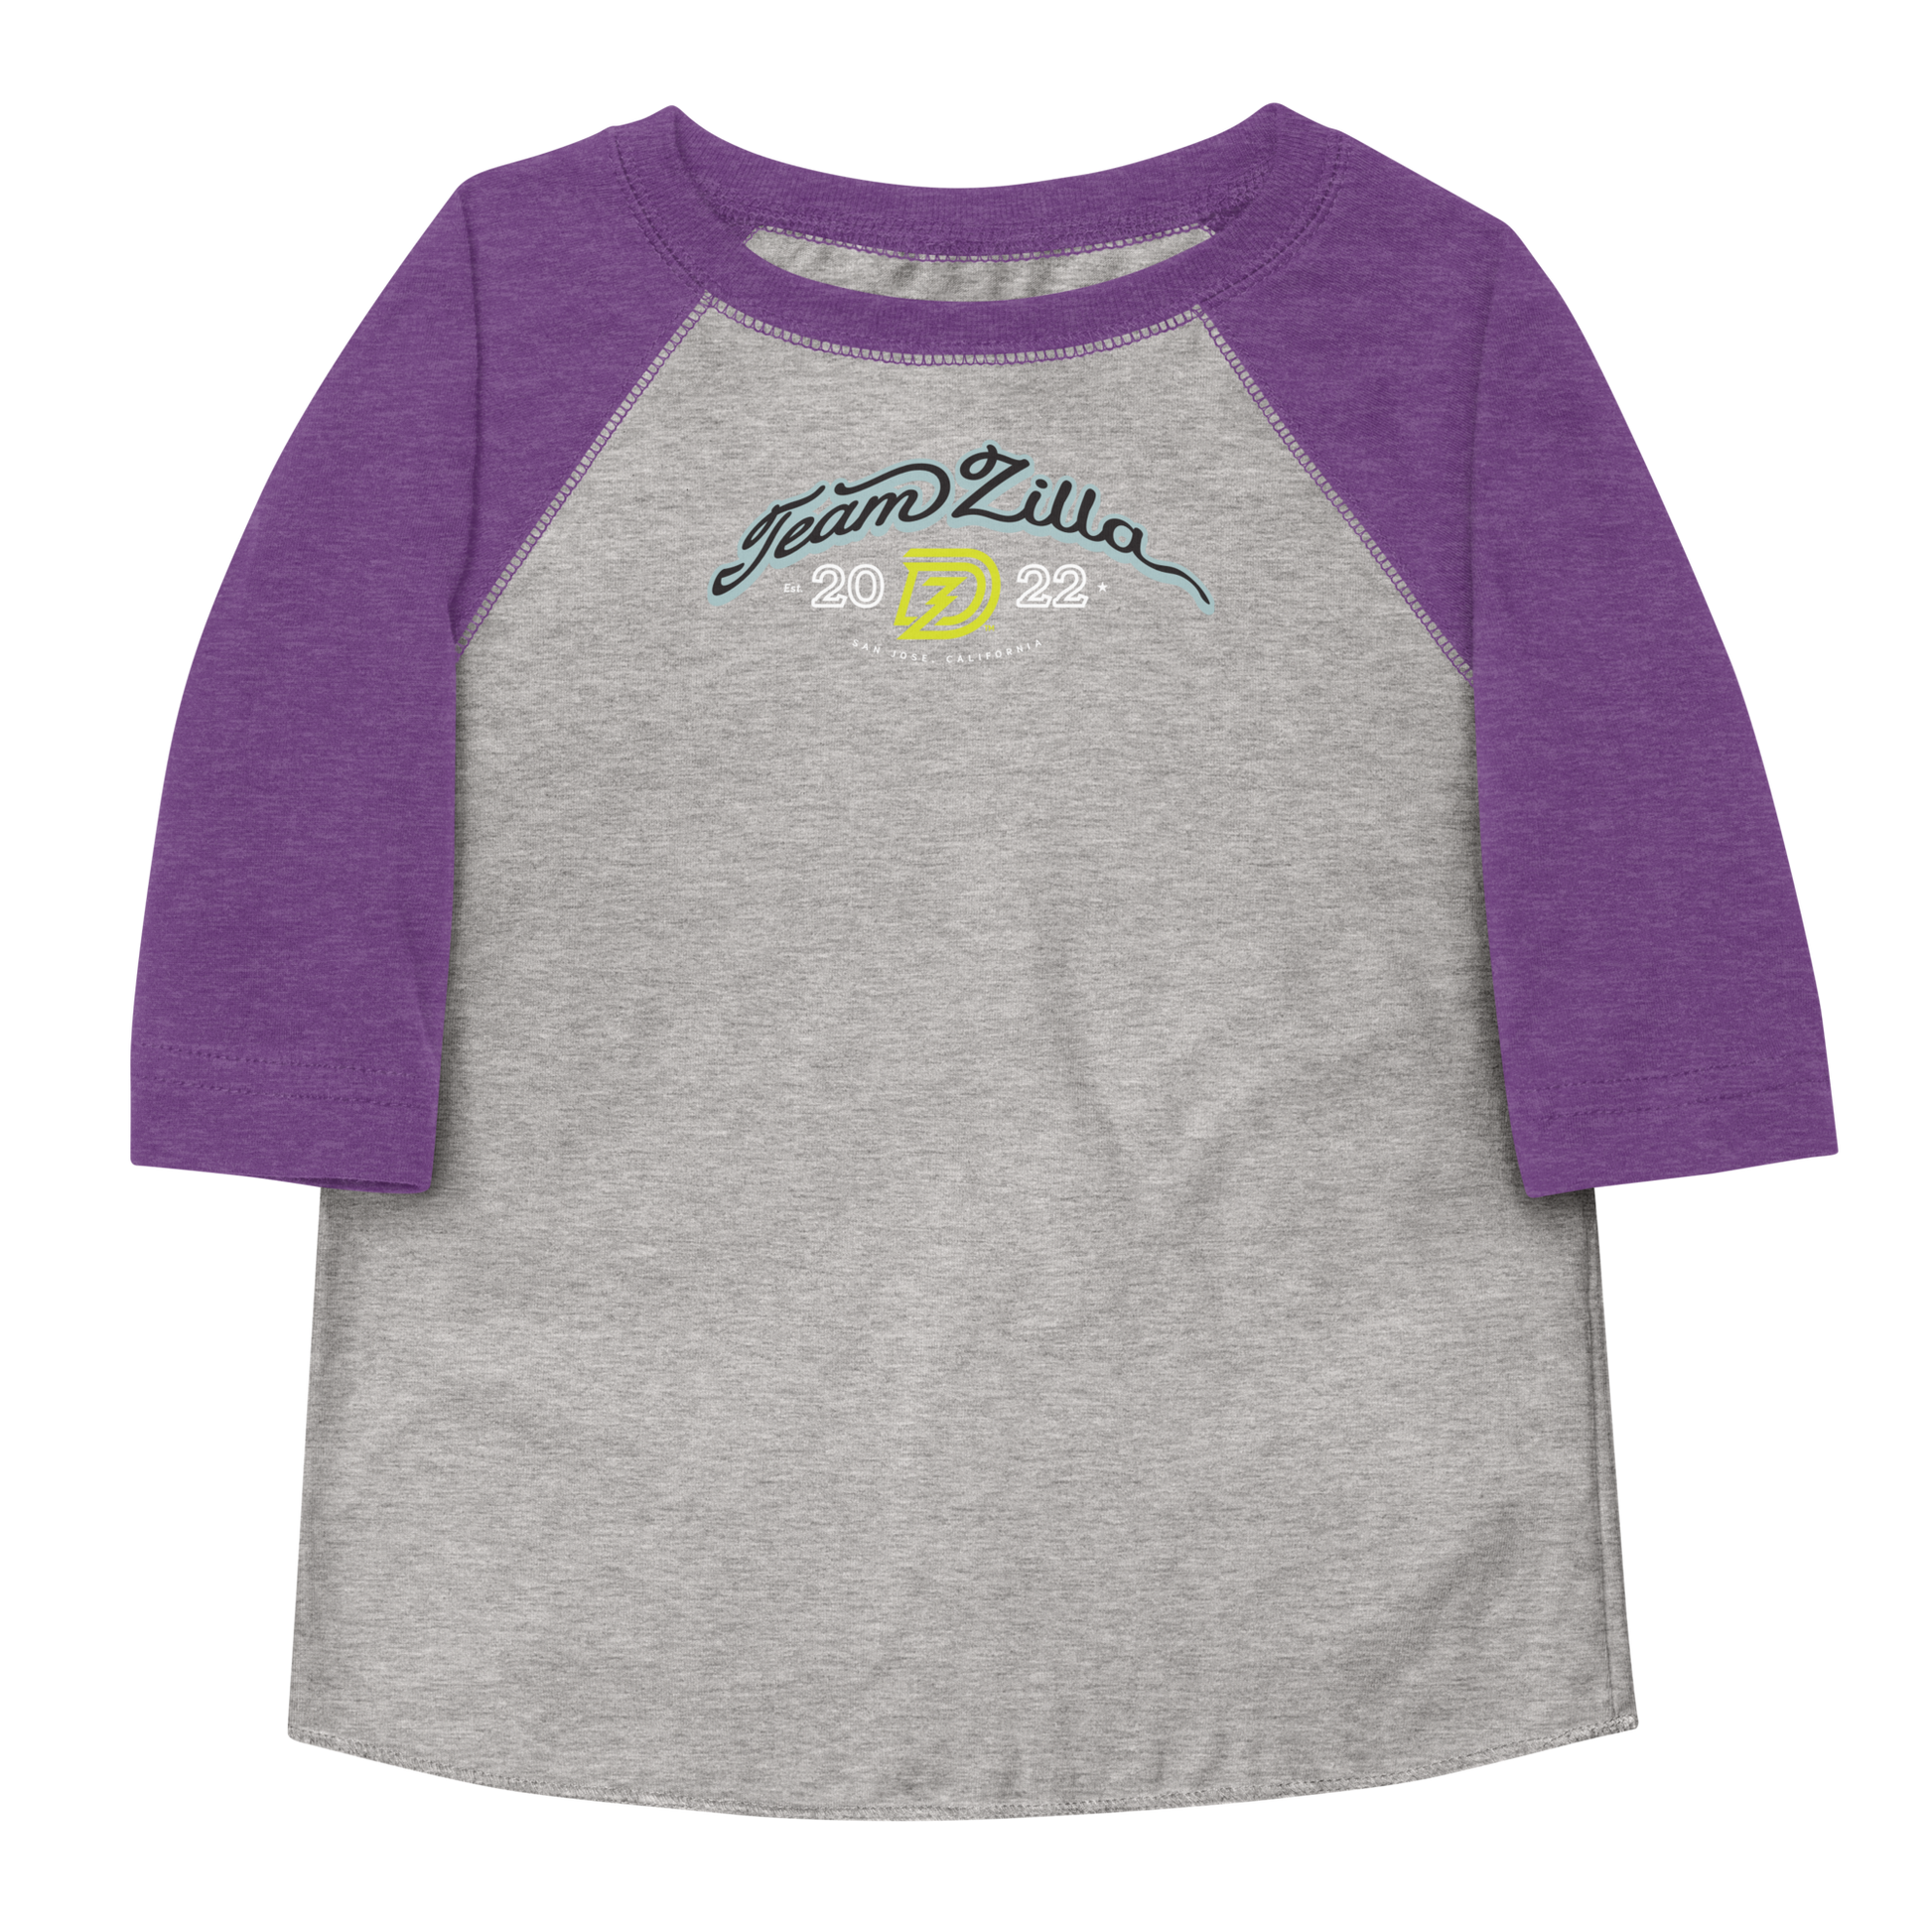 Team Zilla 2022 Toddler Shirt in Vintage Heather with Vintage Purple Sleeves